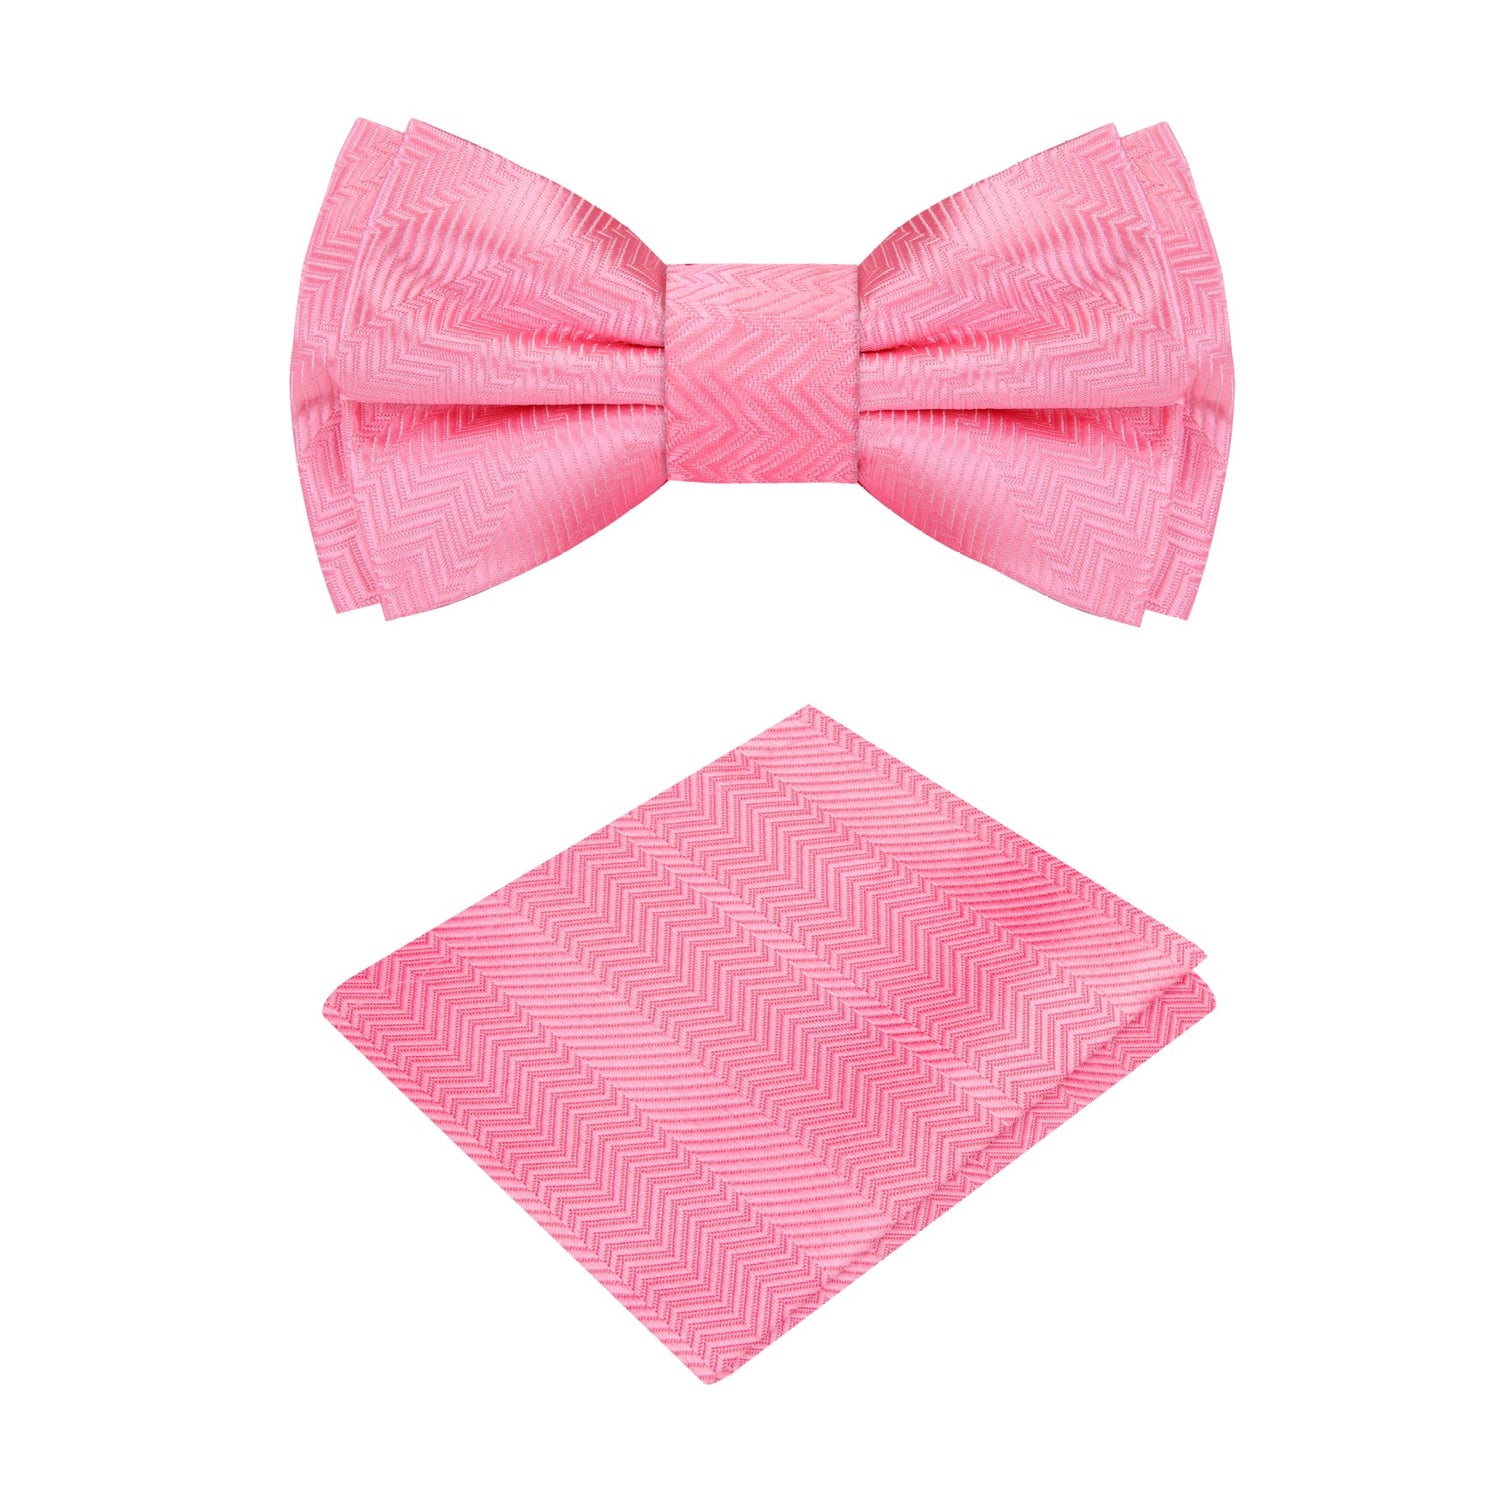 A Light Pink Solid Pattern Self Tie Bow Tie, Matching Pocket Square